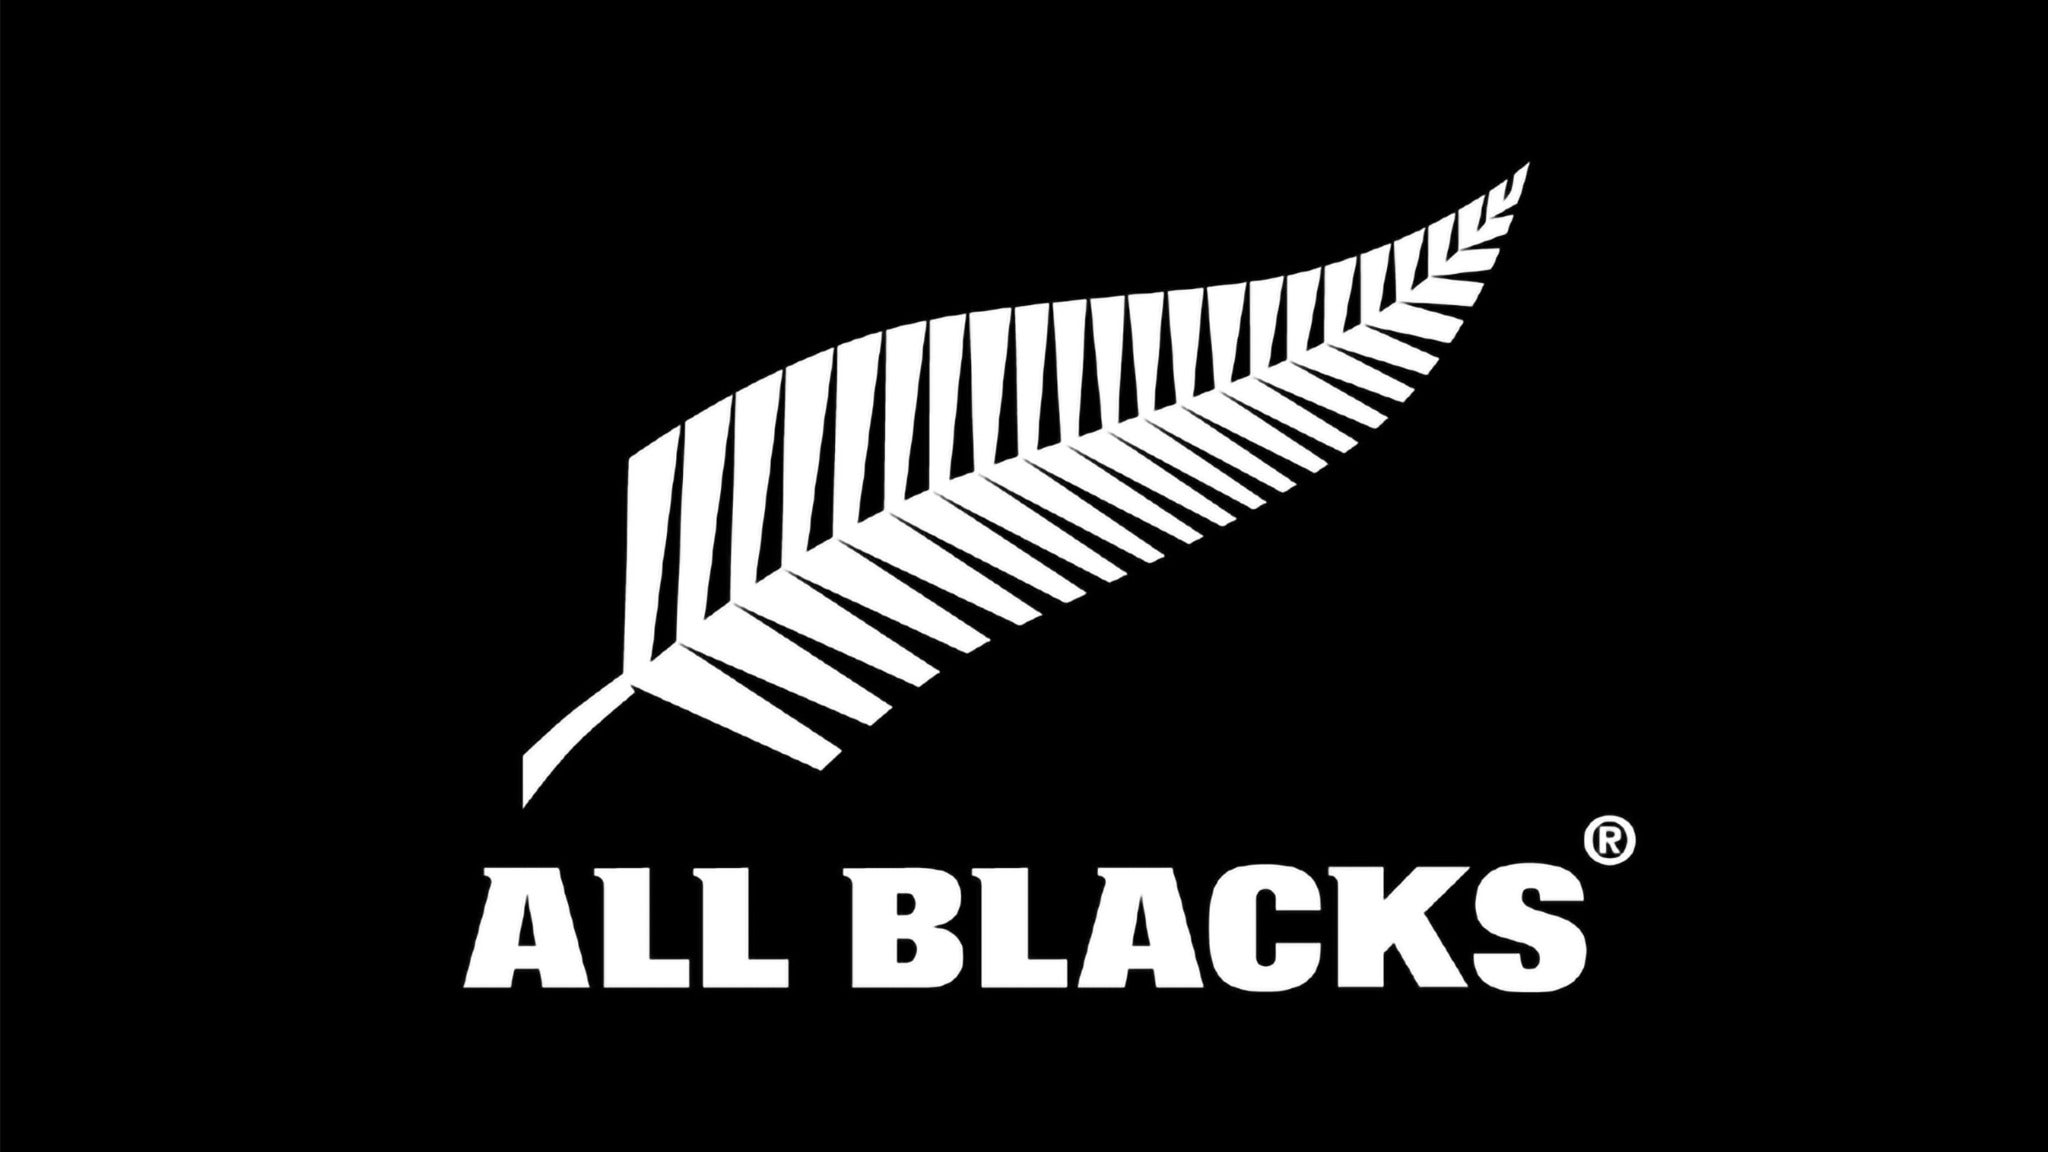 Image used with permission from Ticketmaster | All Blacks v Argentina tickets